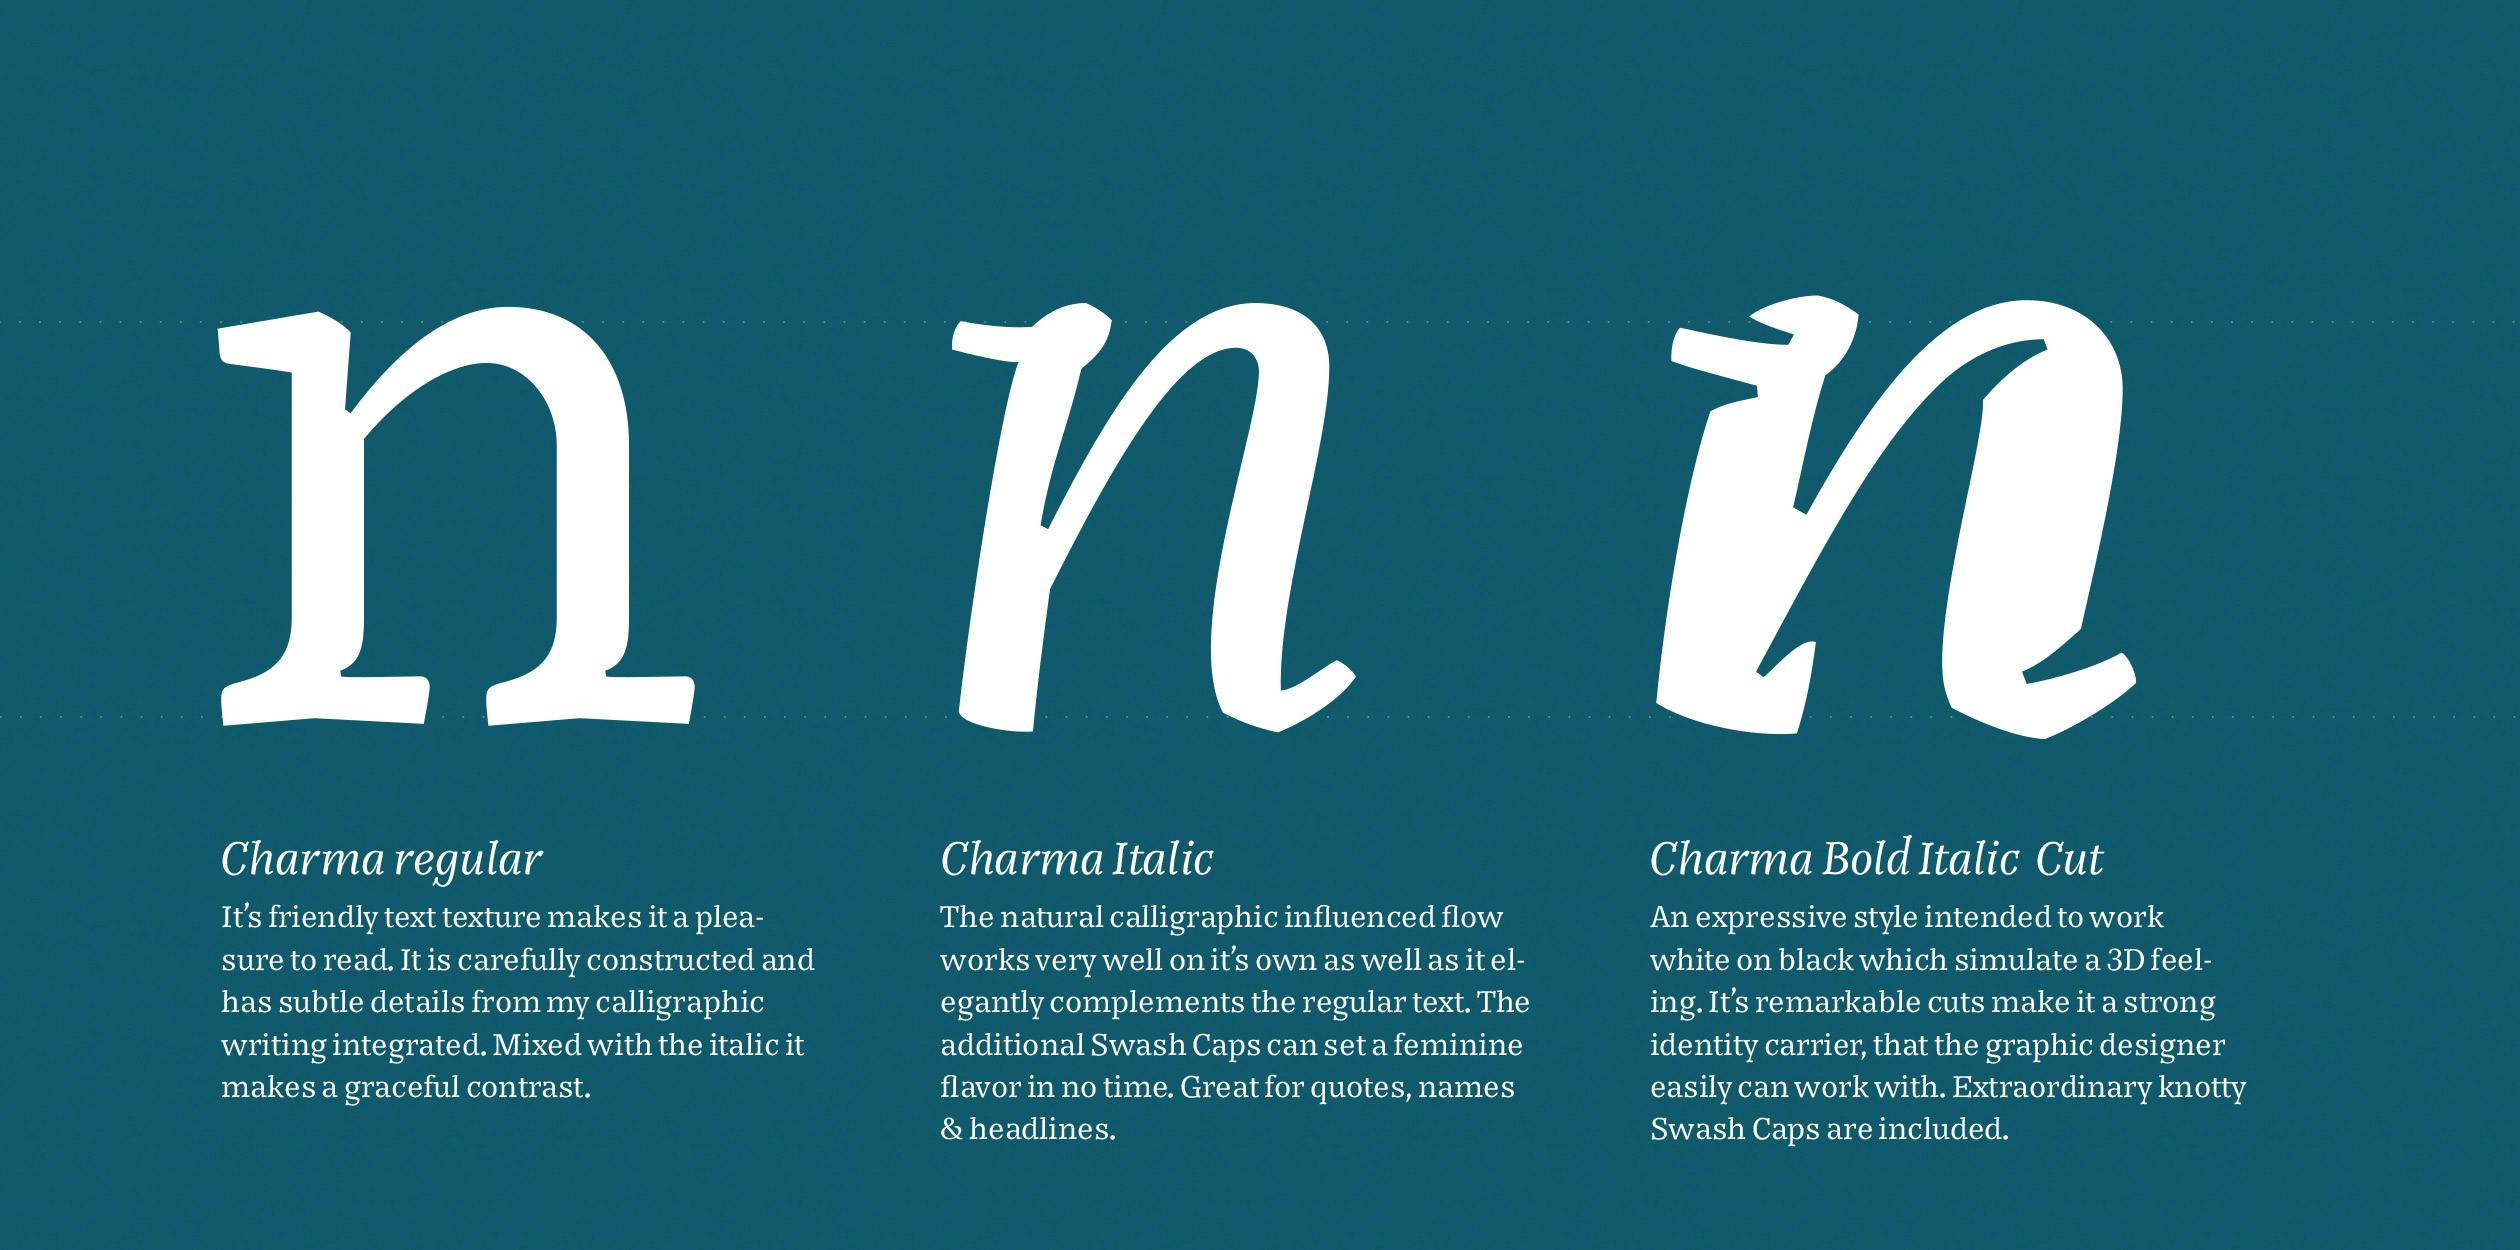 Image of Charma typeface project from Heidi Rand Sørensen